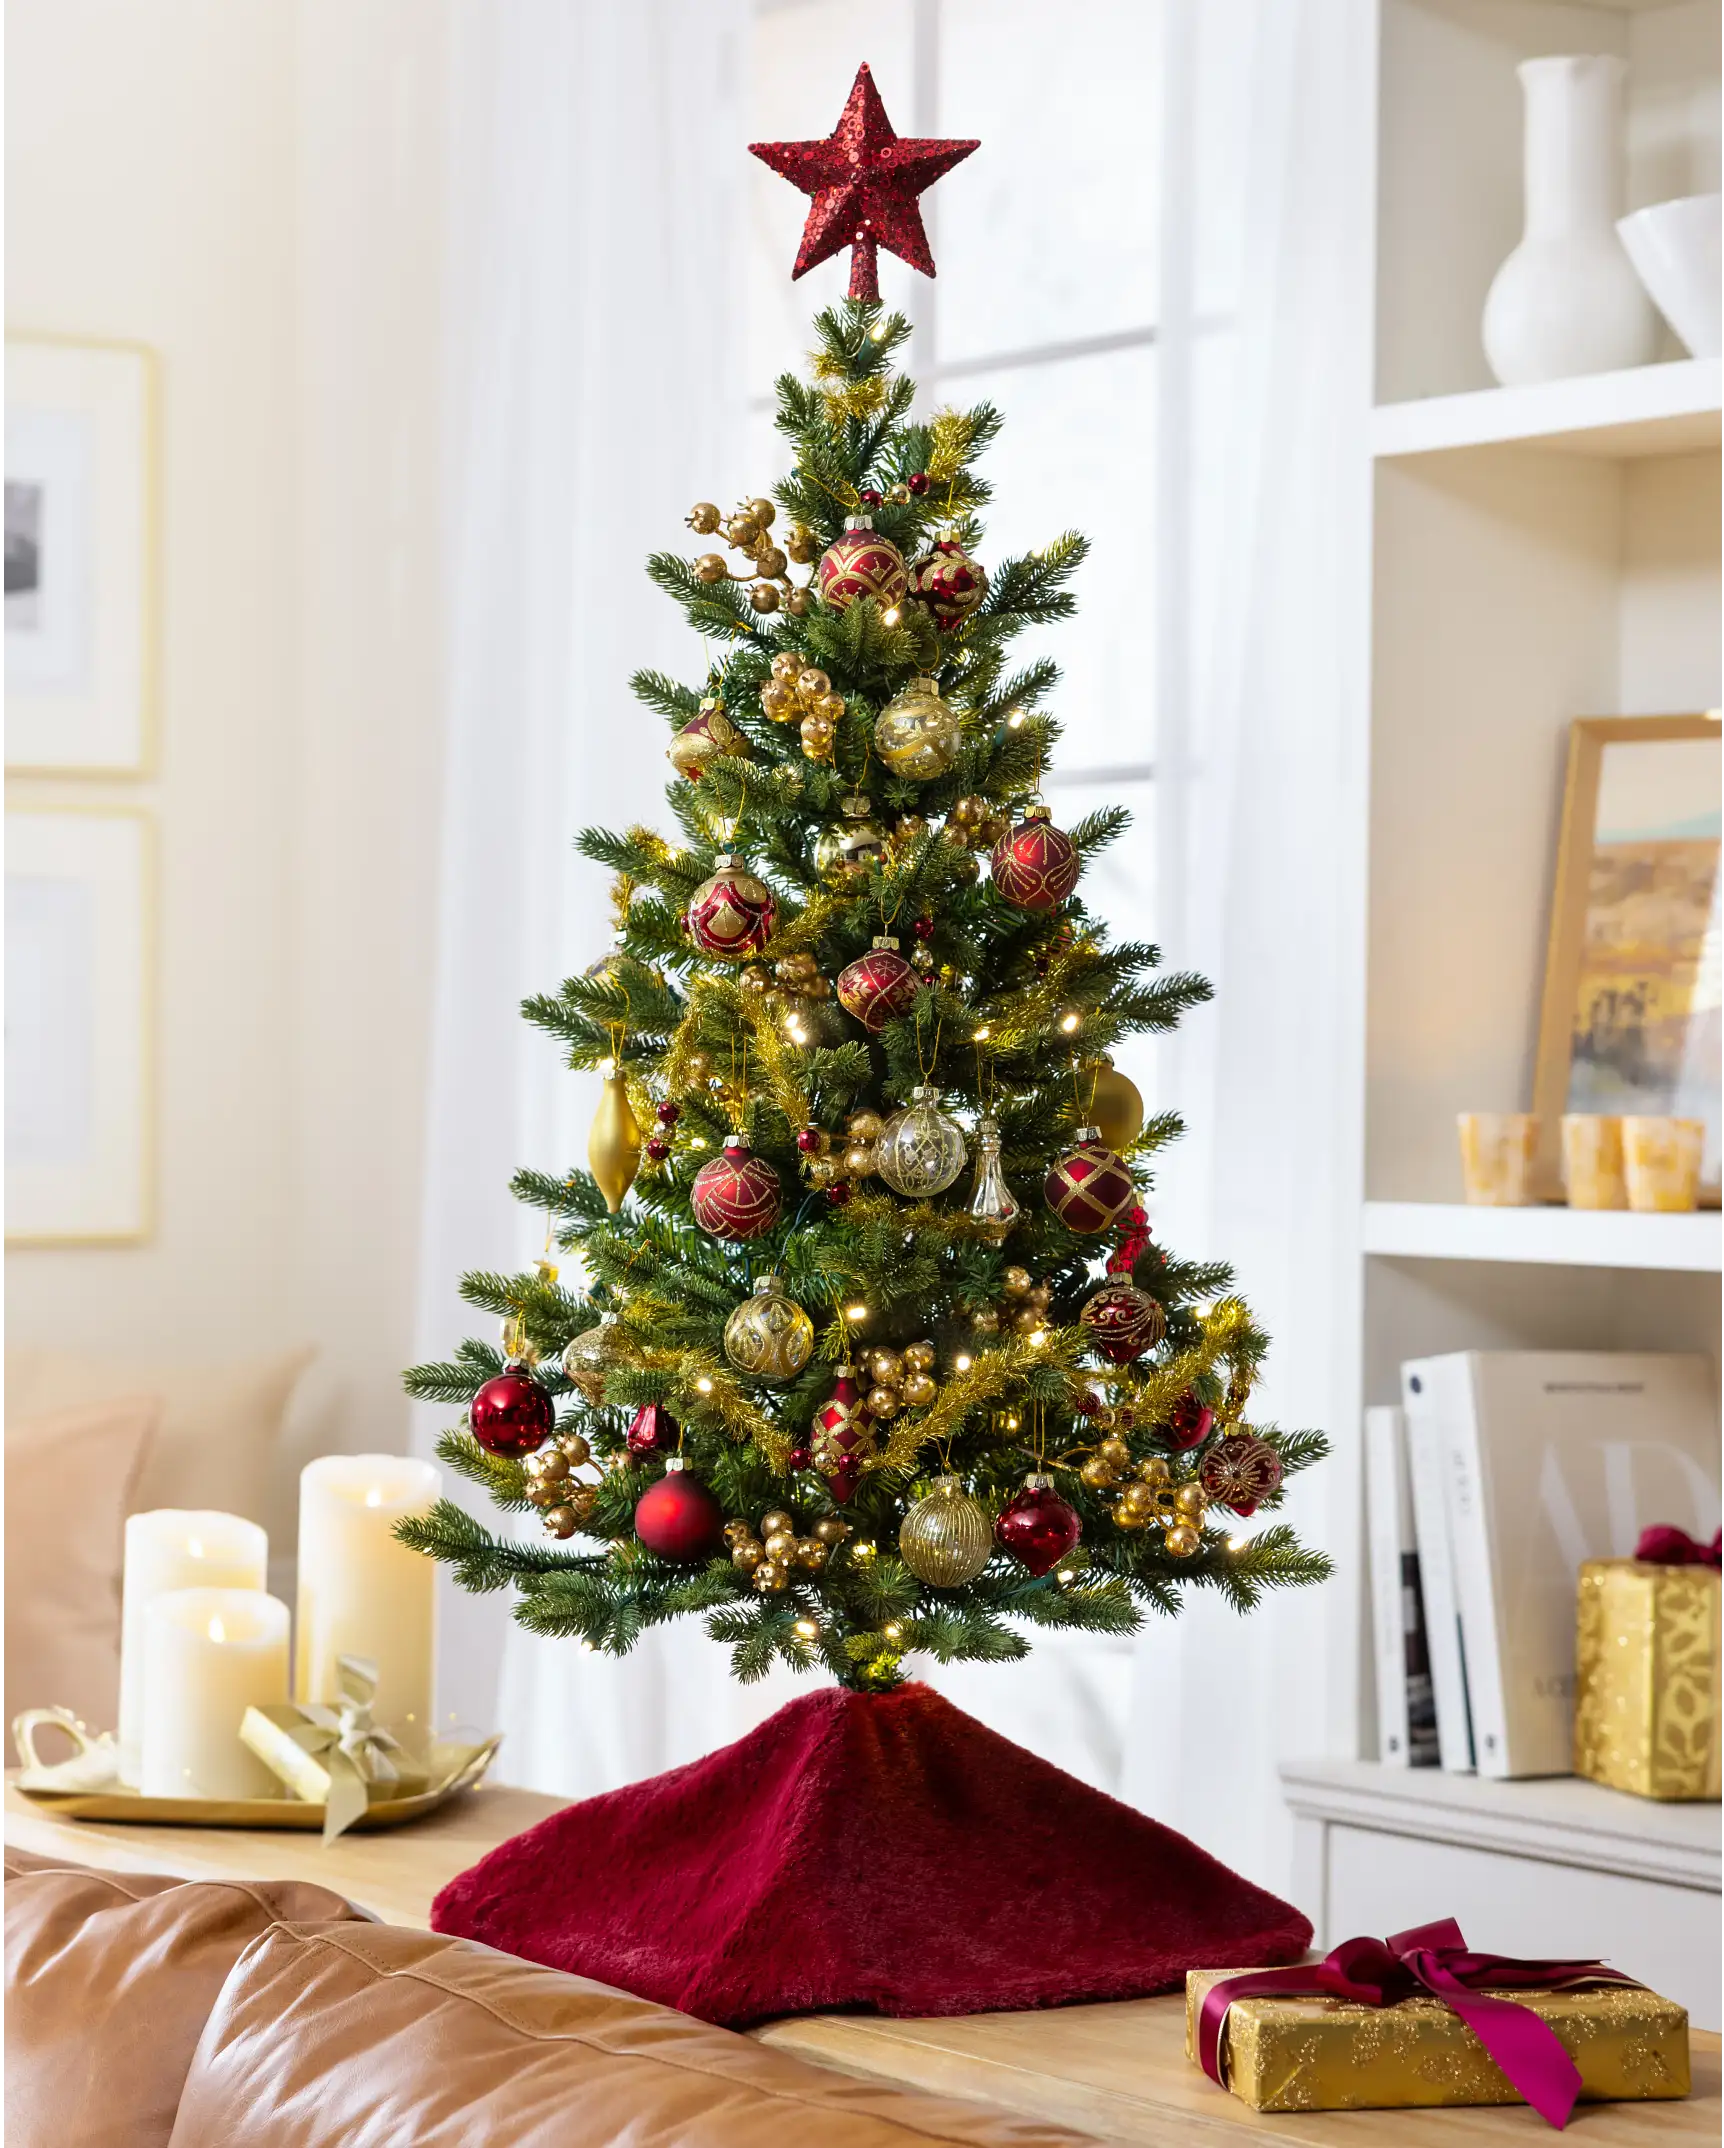 5 Helpful Things on How to Decorate a Flocked Christmas Tree